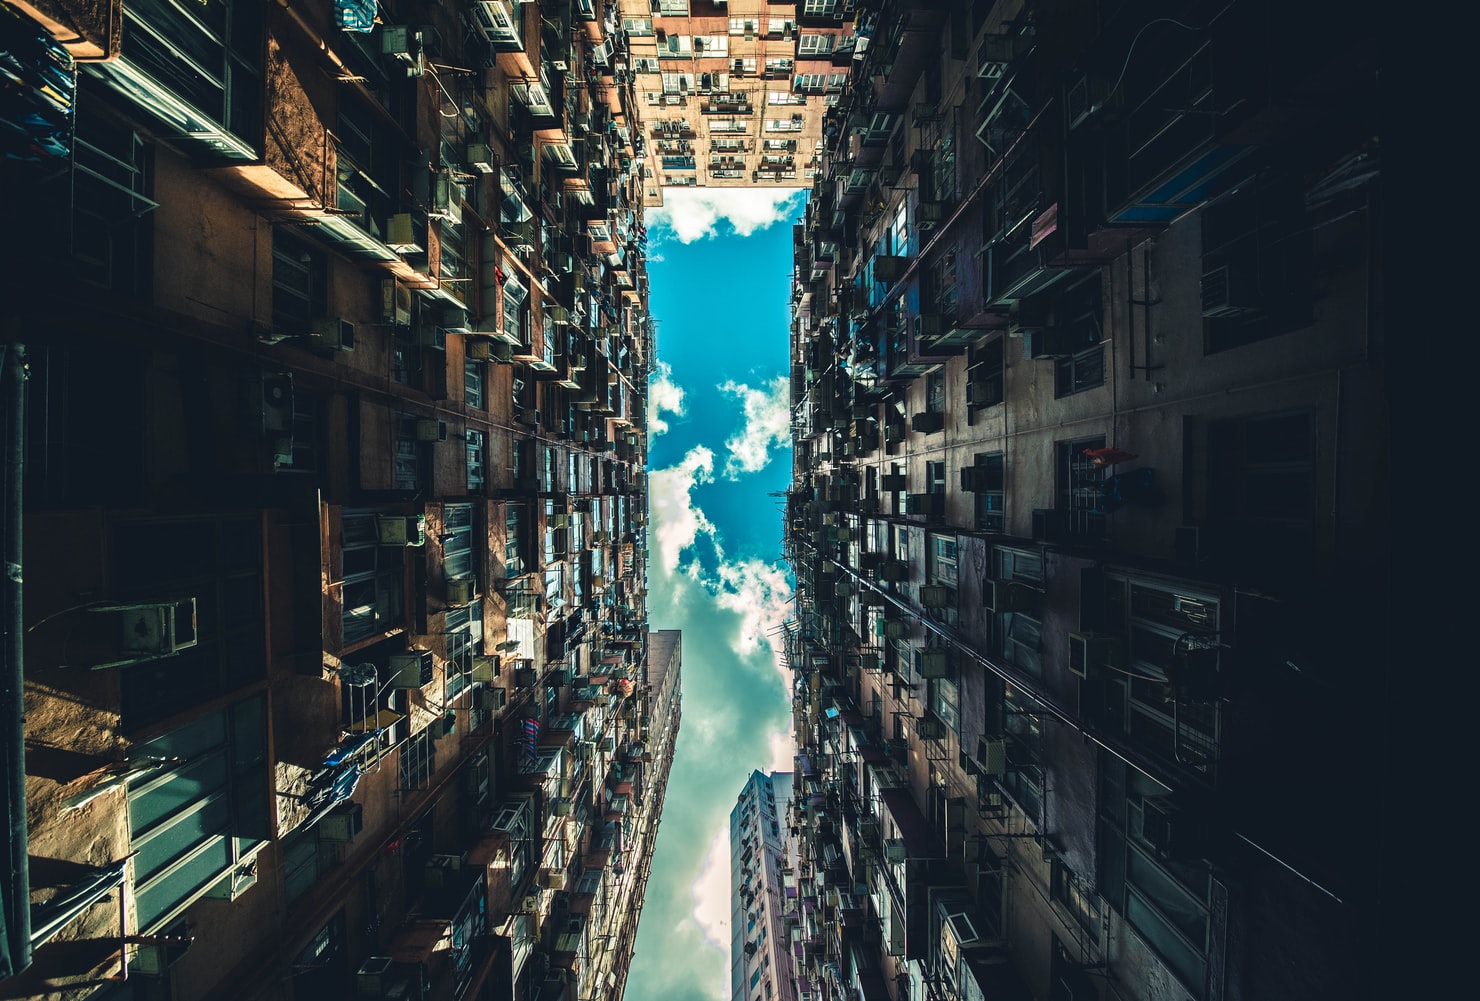 A tight perspective of looking upward towards the sky, while surrounded by buildings on all sides.